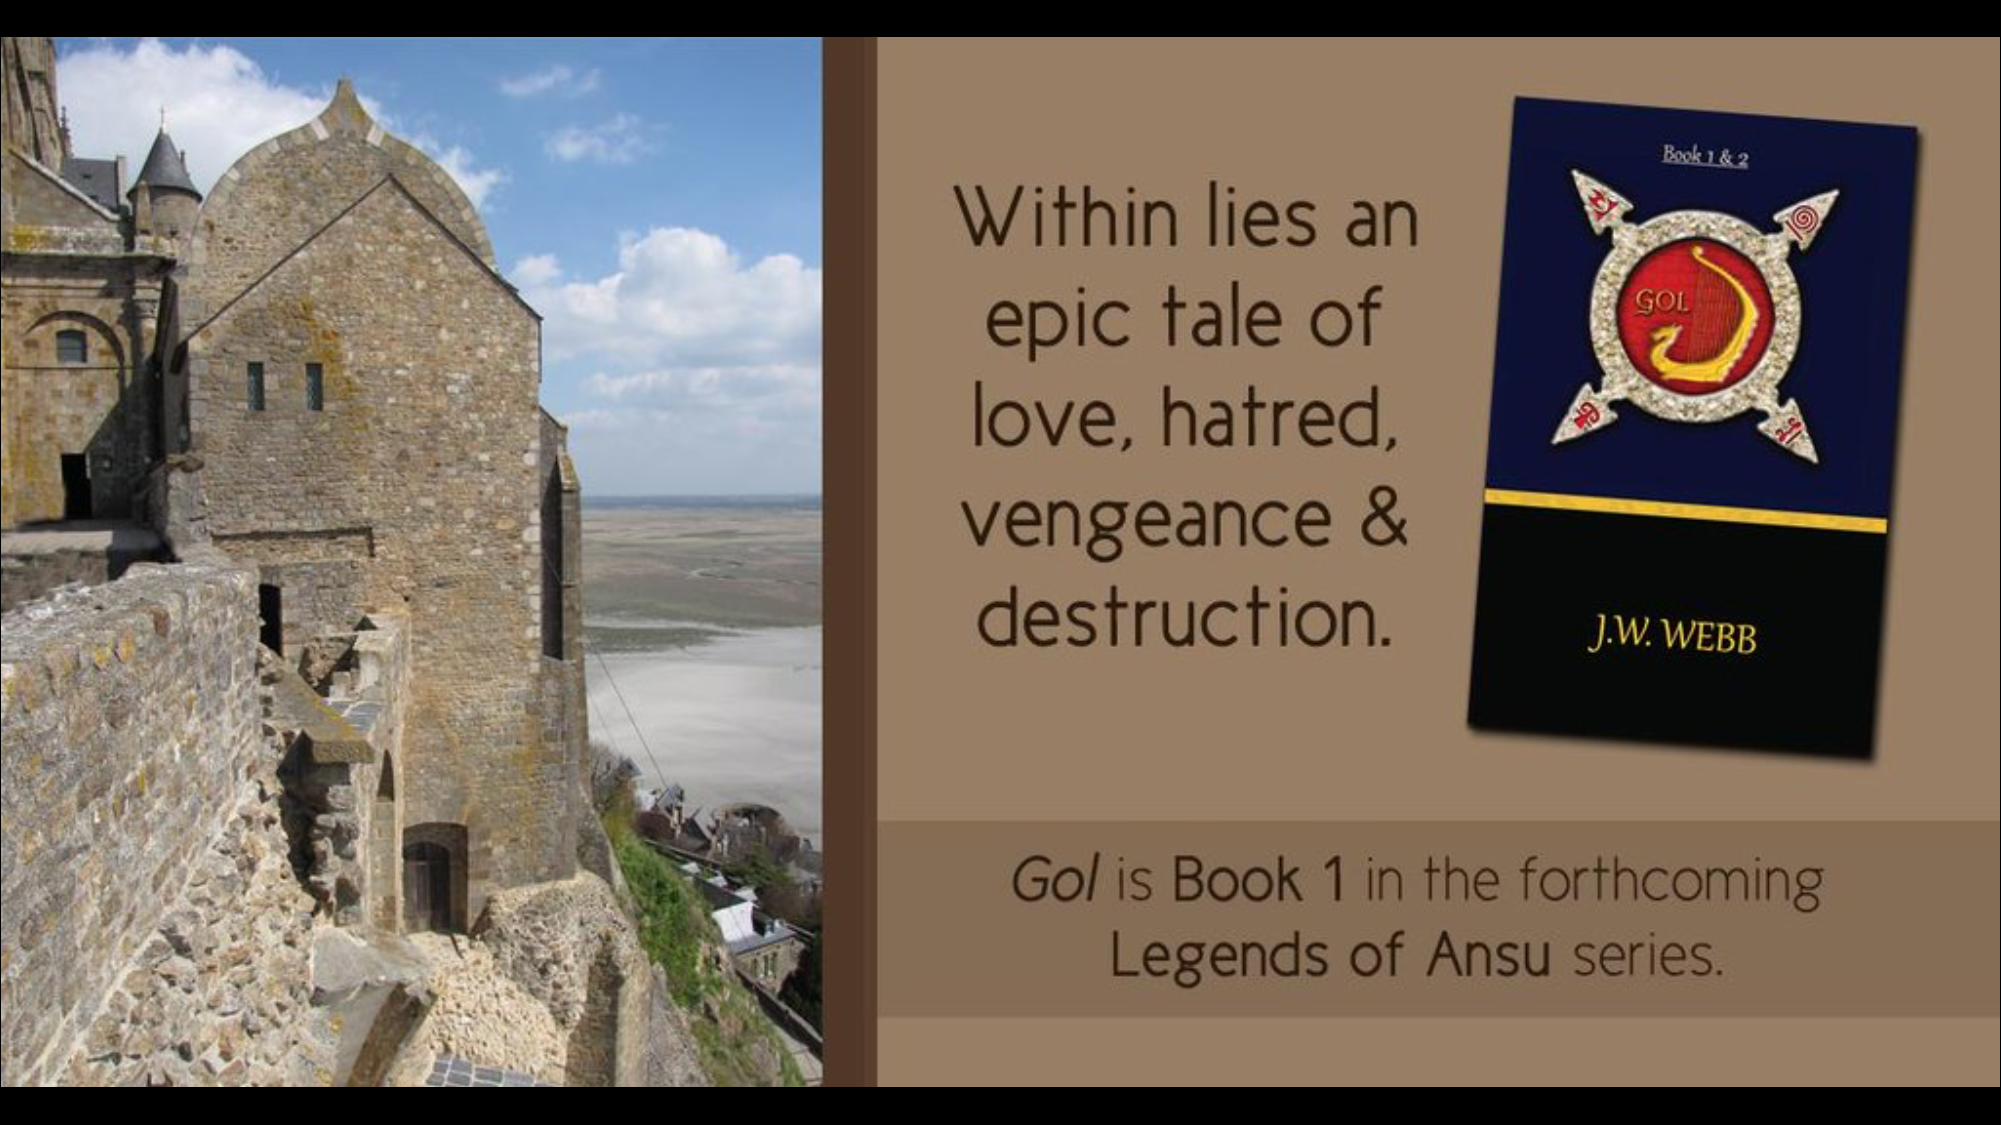 Within lies an epic tale of love, hatred, vengeance & destruction. Gol is book 1 in the Legends of Ansu series.